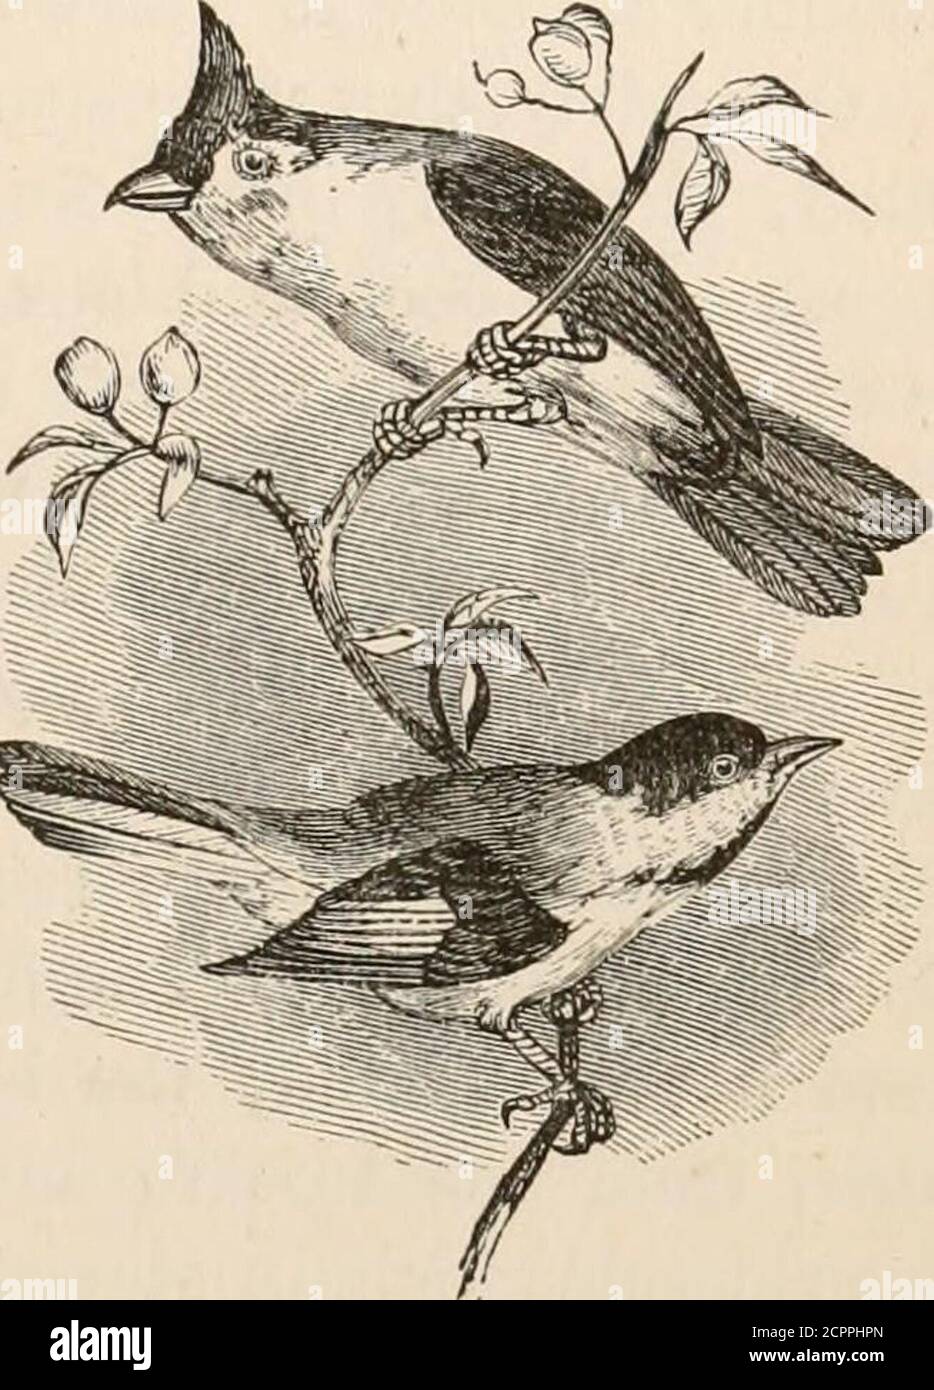 . Ornithology and oy of New England: containing full descriptions of the birds of New England, and adjoining states and provinces .. . very gently andslightly convex; tarsus but little longer than middle toe; crown and throat gener-ally black. PARUS AimCkVlLLUS. — Linrumis. The Black-cap Titmouse; Chick-a-dee. Parus atricajyiUus, Linnaeus. Syst. Nat, I. (1766) 341. Wilson, Am. Cm., L(1808) 134. Aud. Cm. Biog., IV. (1838).Paruspalustns, Nuttall. Man., I. (1832) 79. Description. Second quill as long as the secondaries; tail very slightly rounded, lateralfeathers about ten one-hundredths shorter Stock Photo